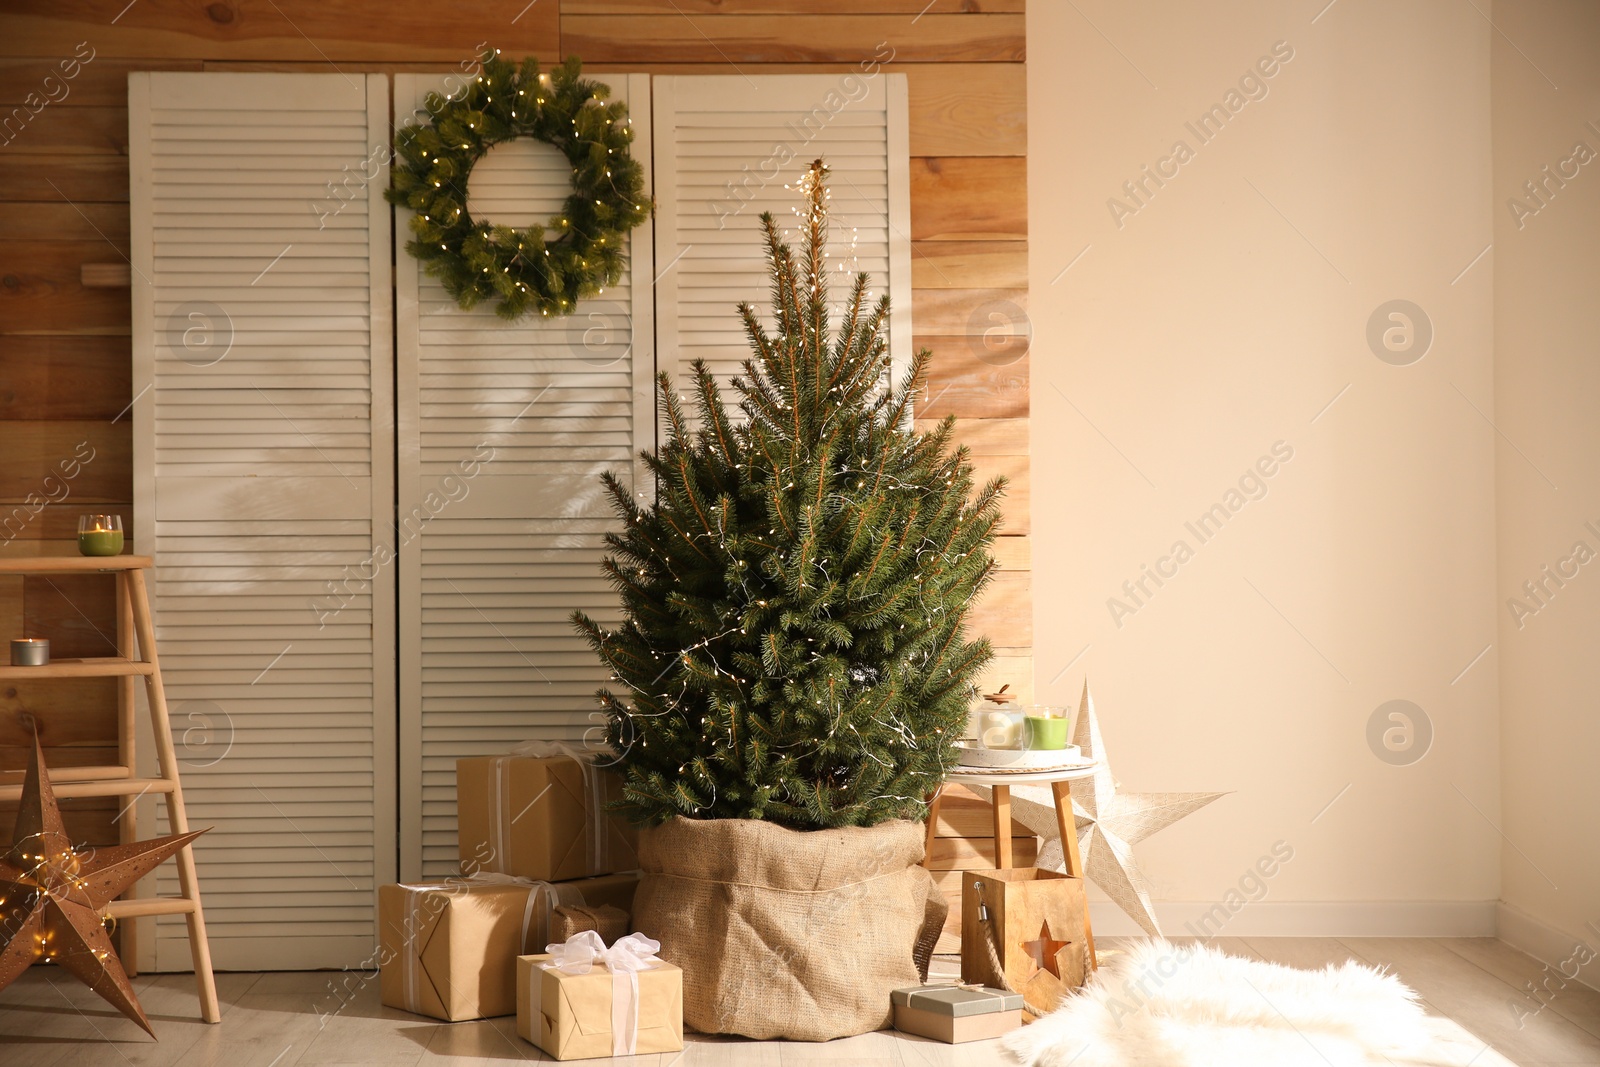 Photo of Spacious room interior with small Christmas tree and wreath